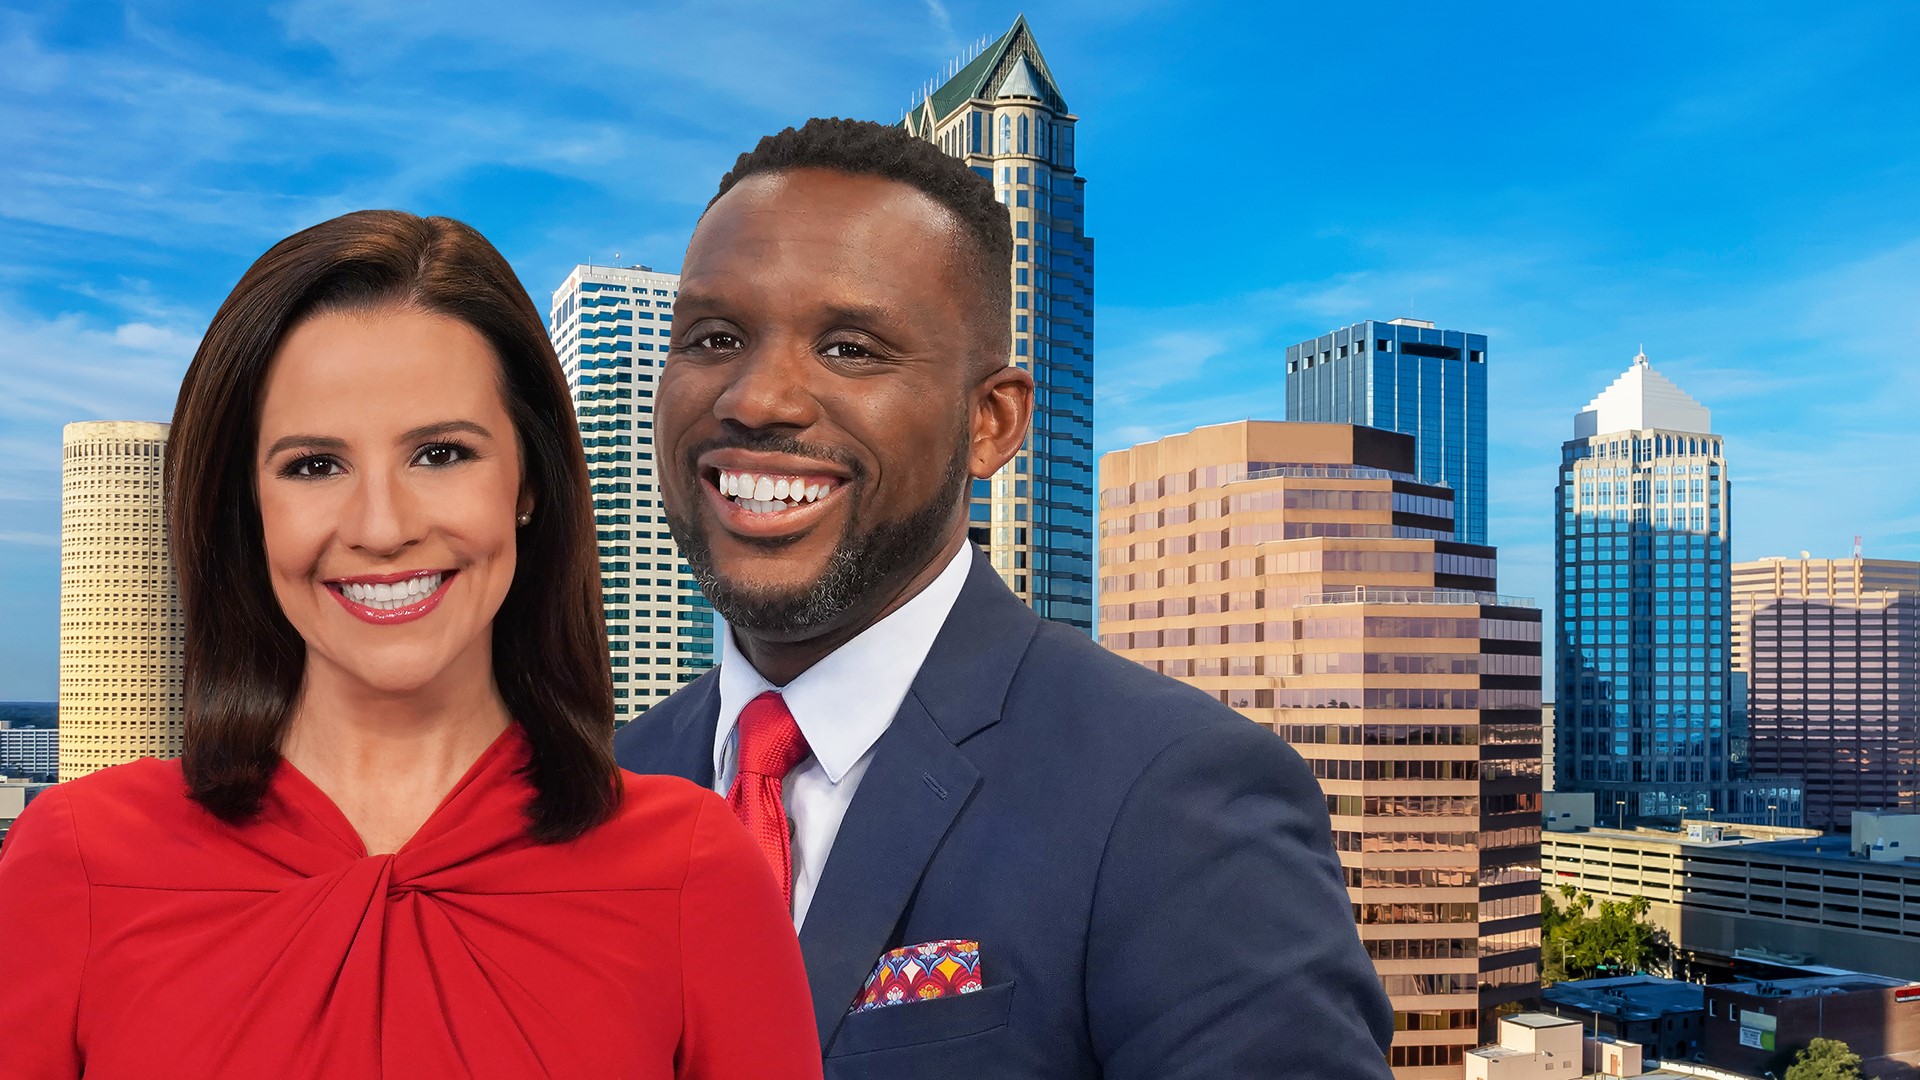 Get a recap of the morning's news and a look ahead to the afternoon. Plus, we're keeping up with the changing forecast to help you plan your evening.